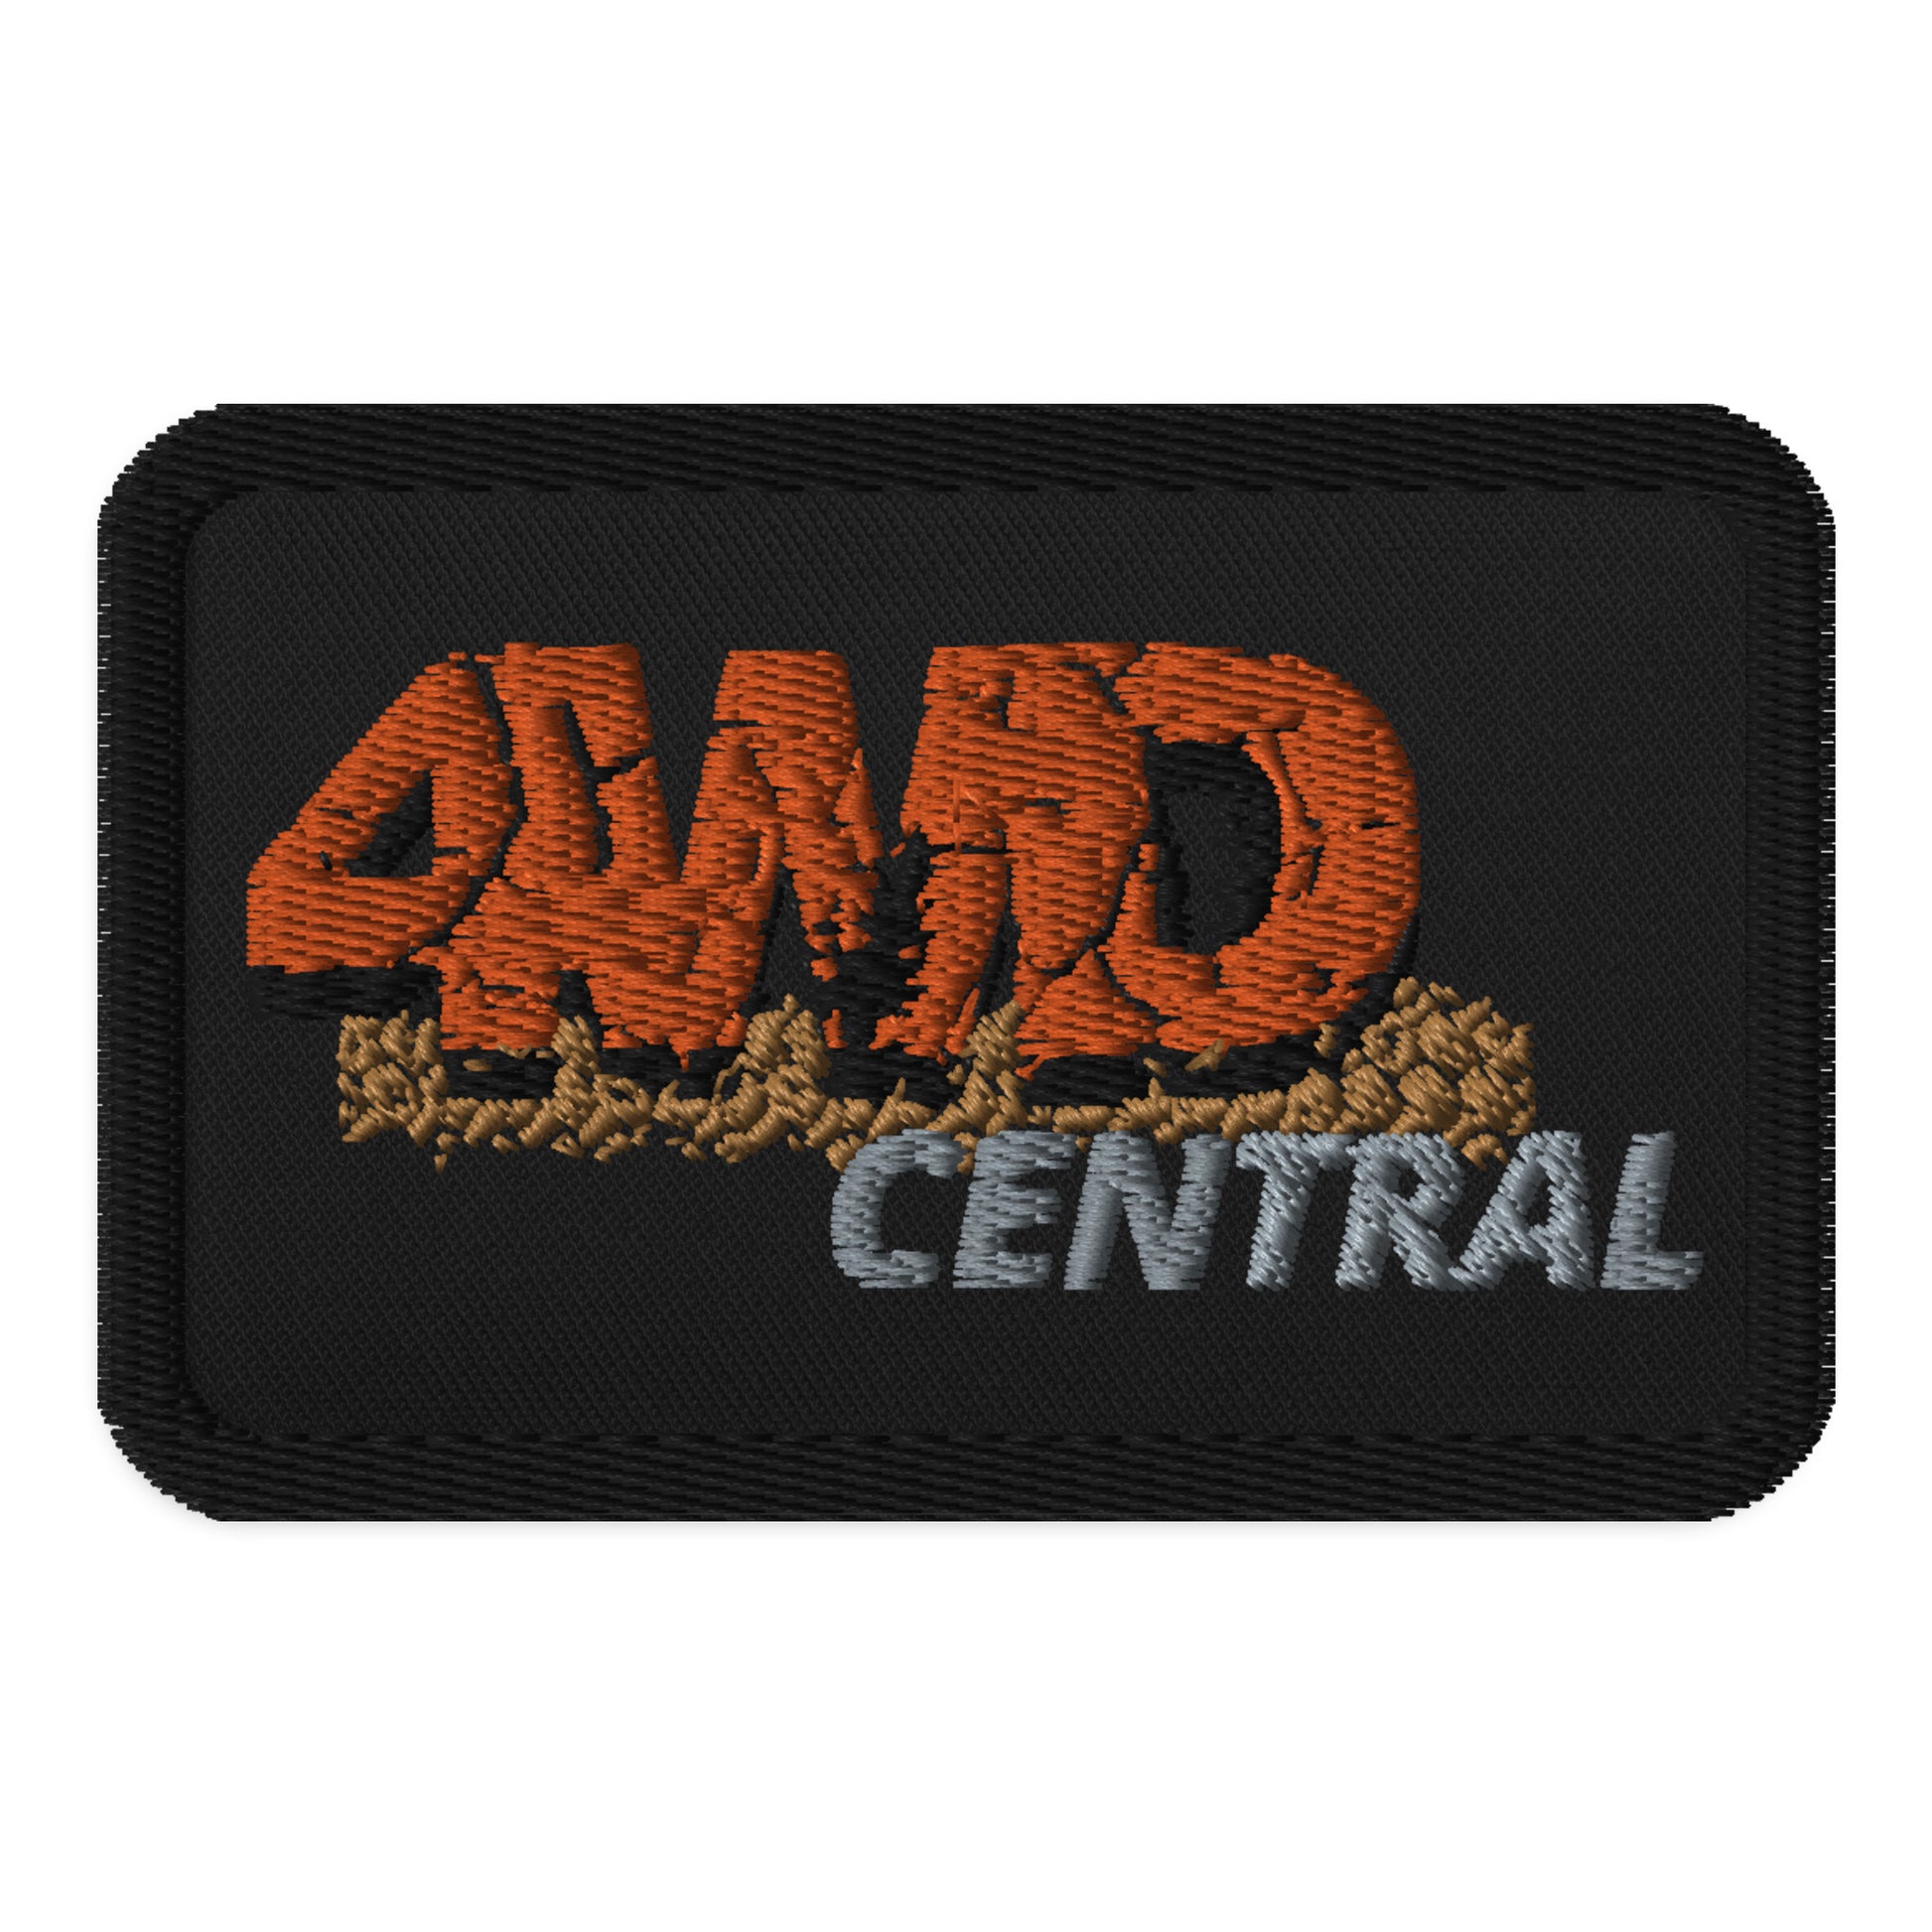 4WD Central - Embroidered patches - Default Title